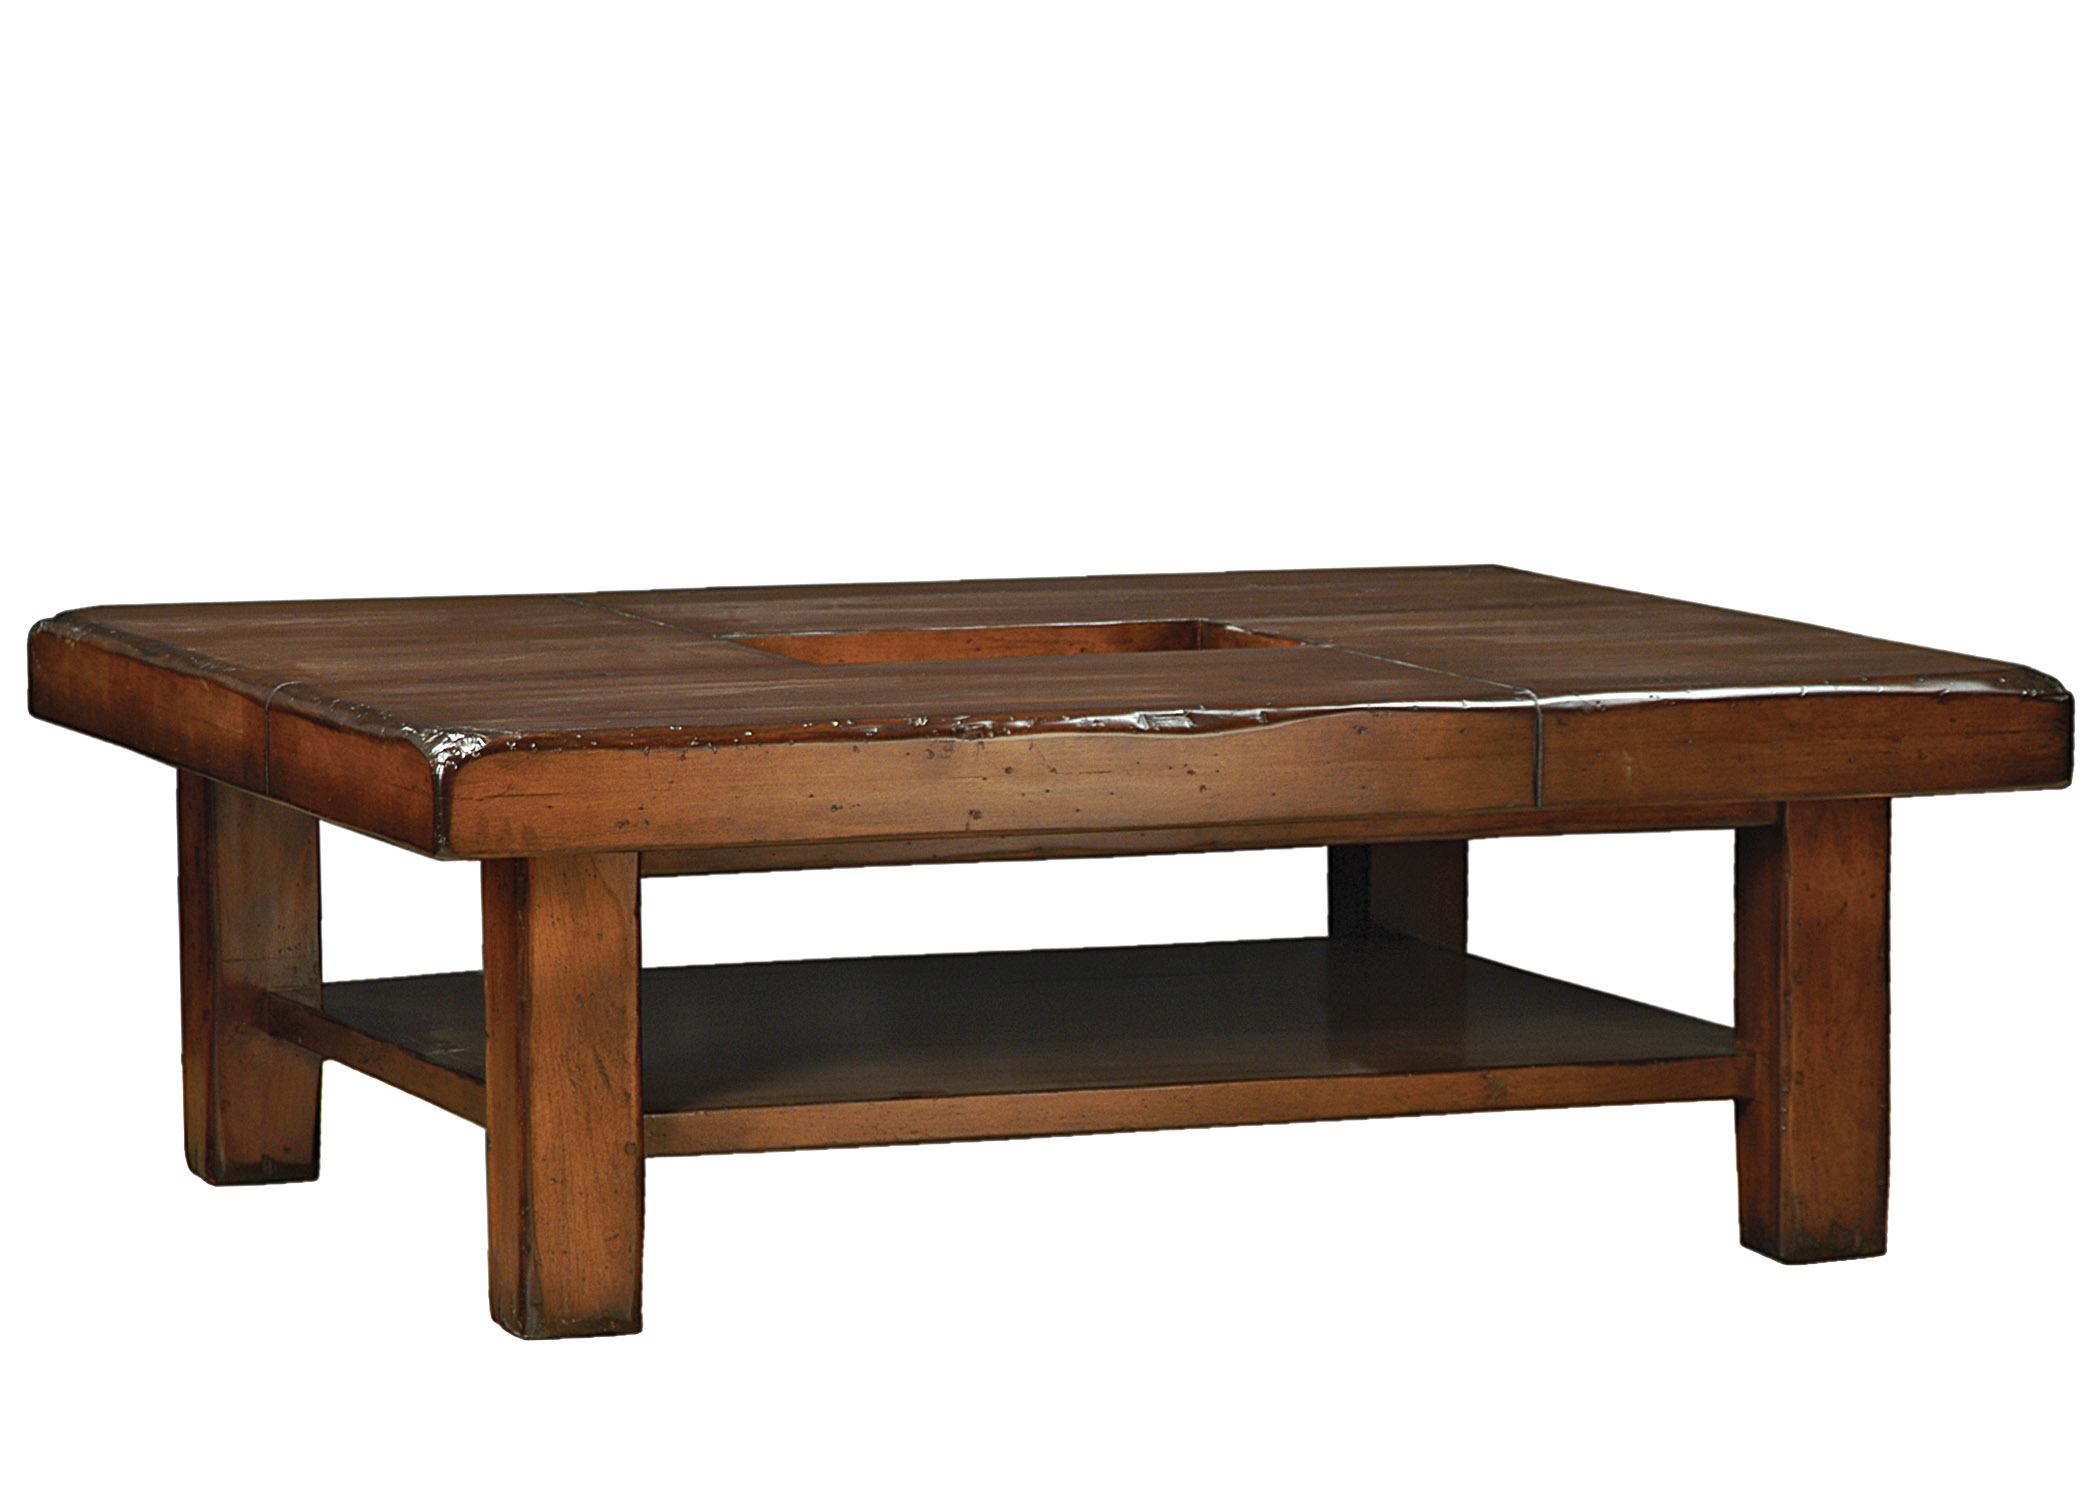 Vail contemporary modern rustic cocktail / coffee table by Woodland